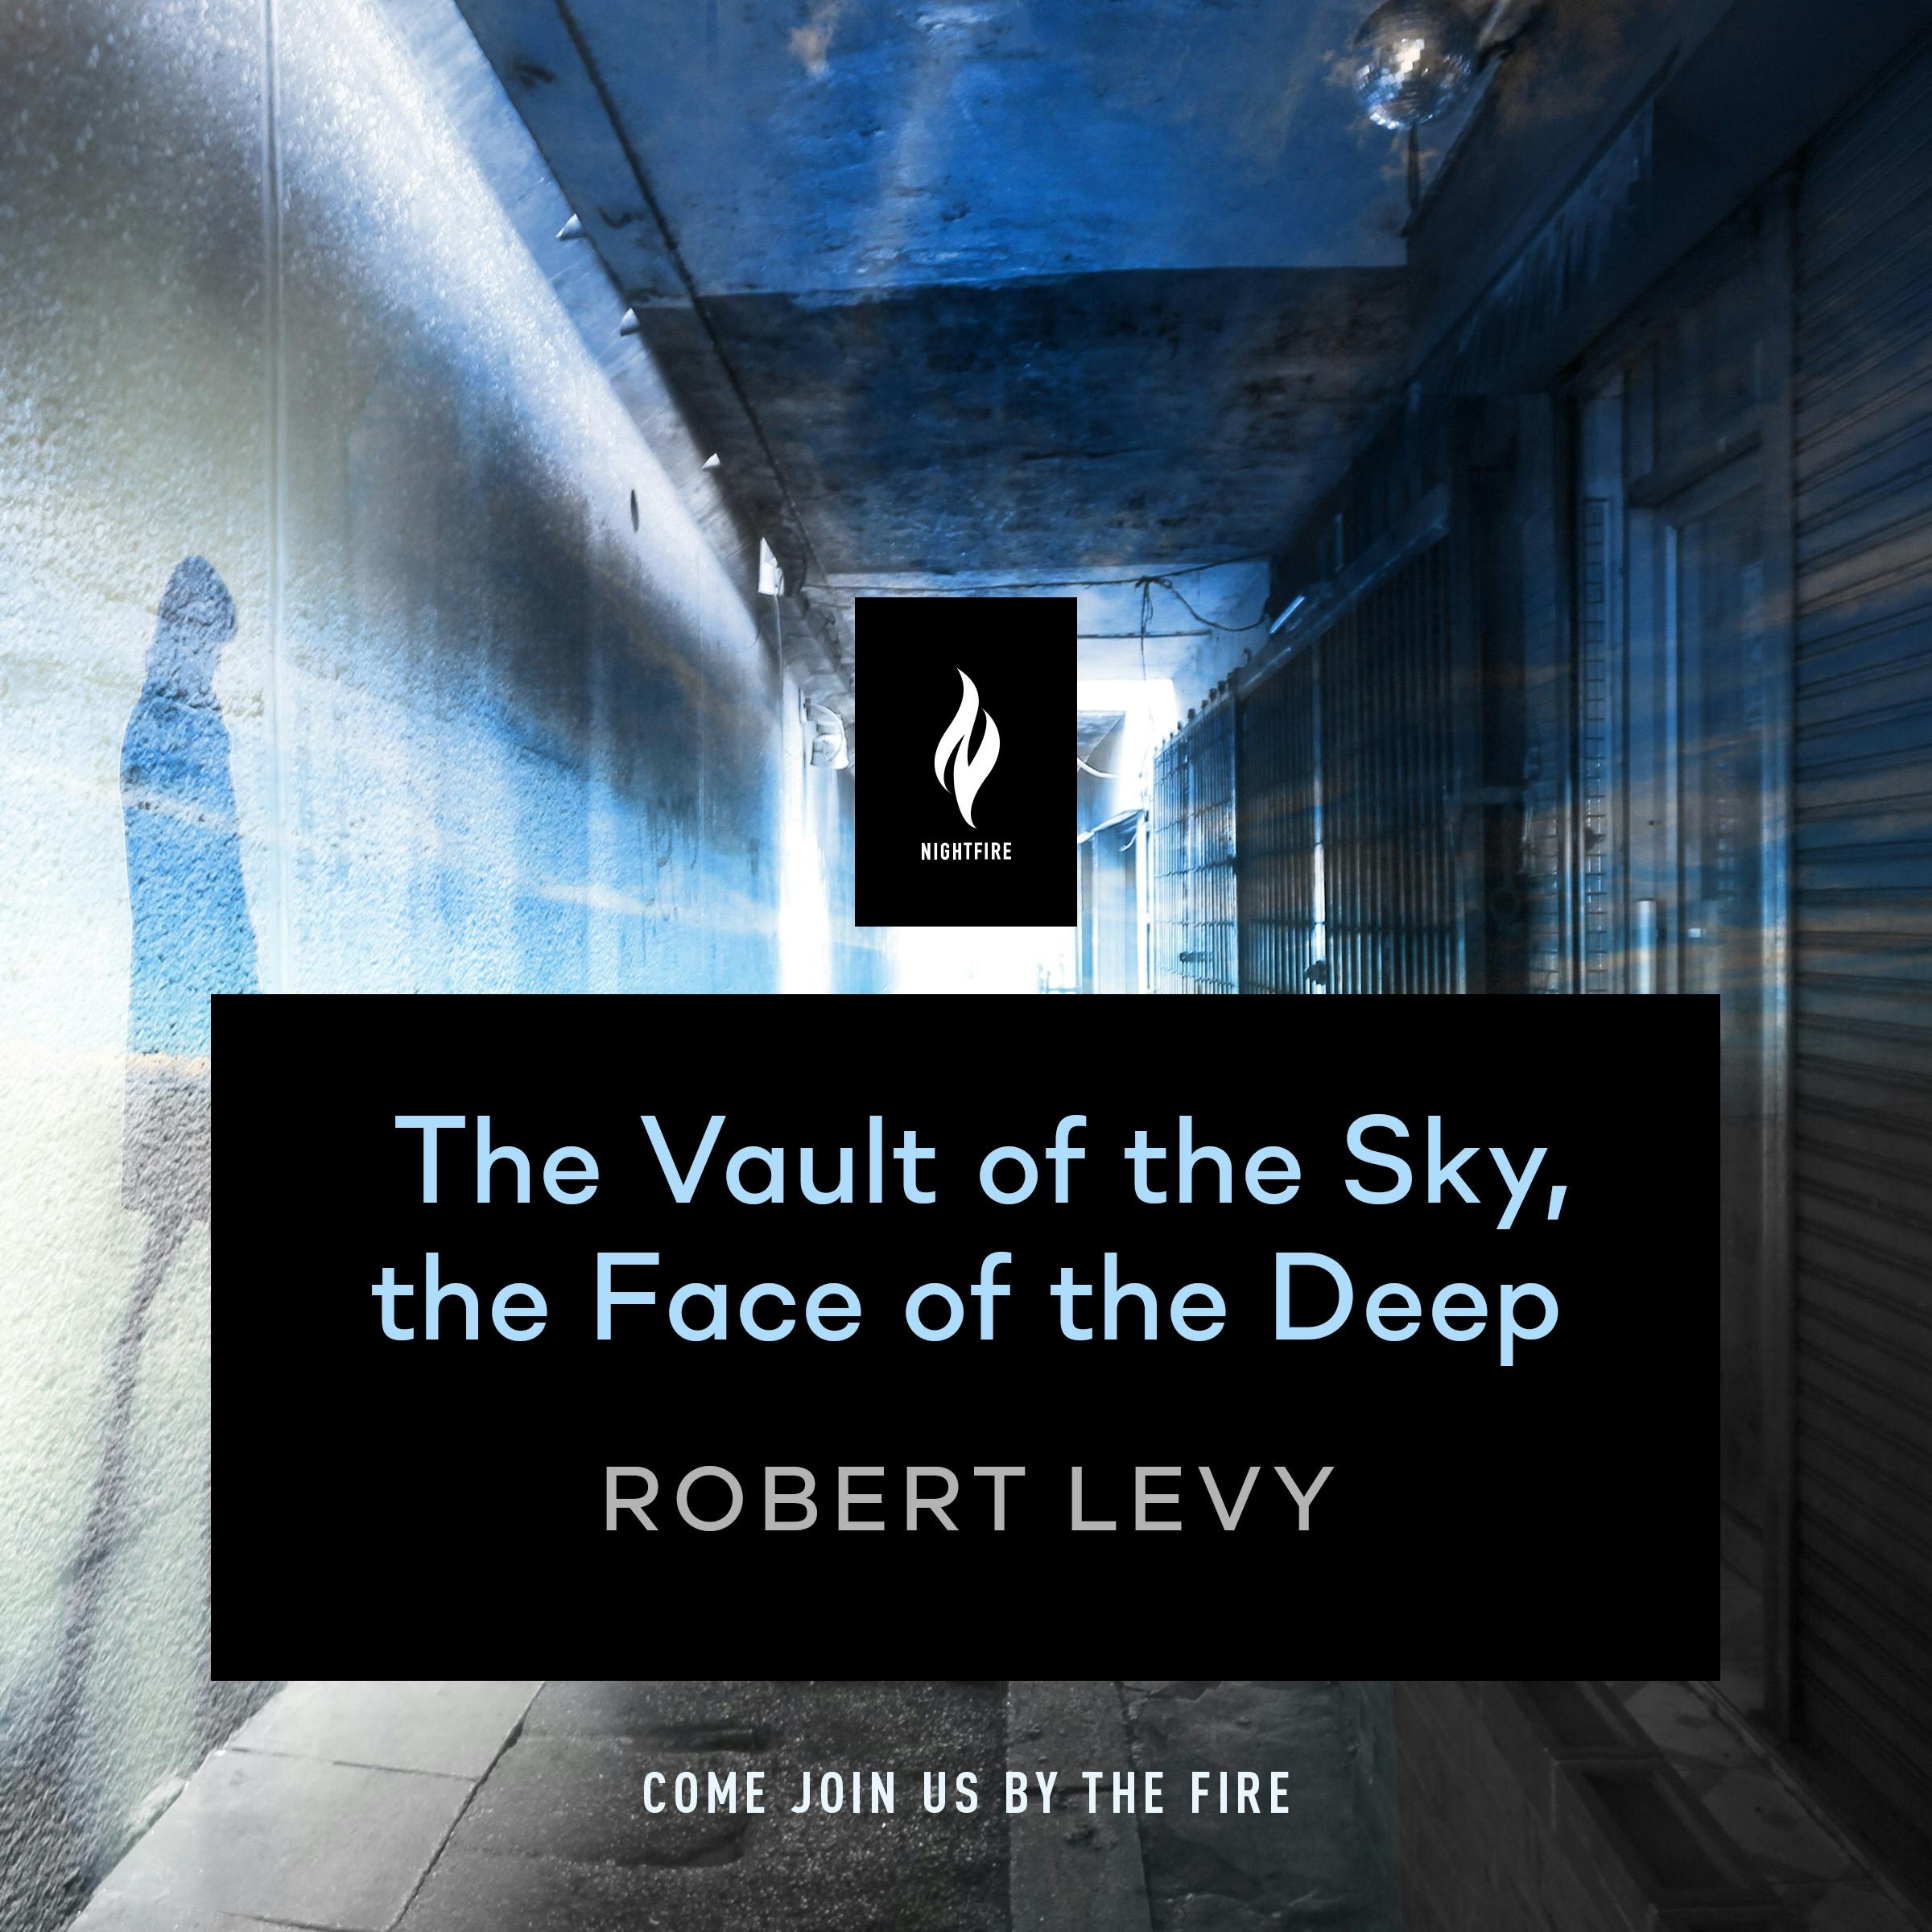 The Vault of the Sky, the Face of the Deep